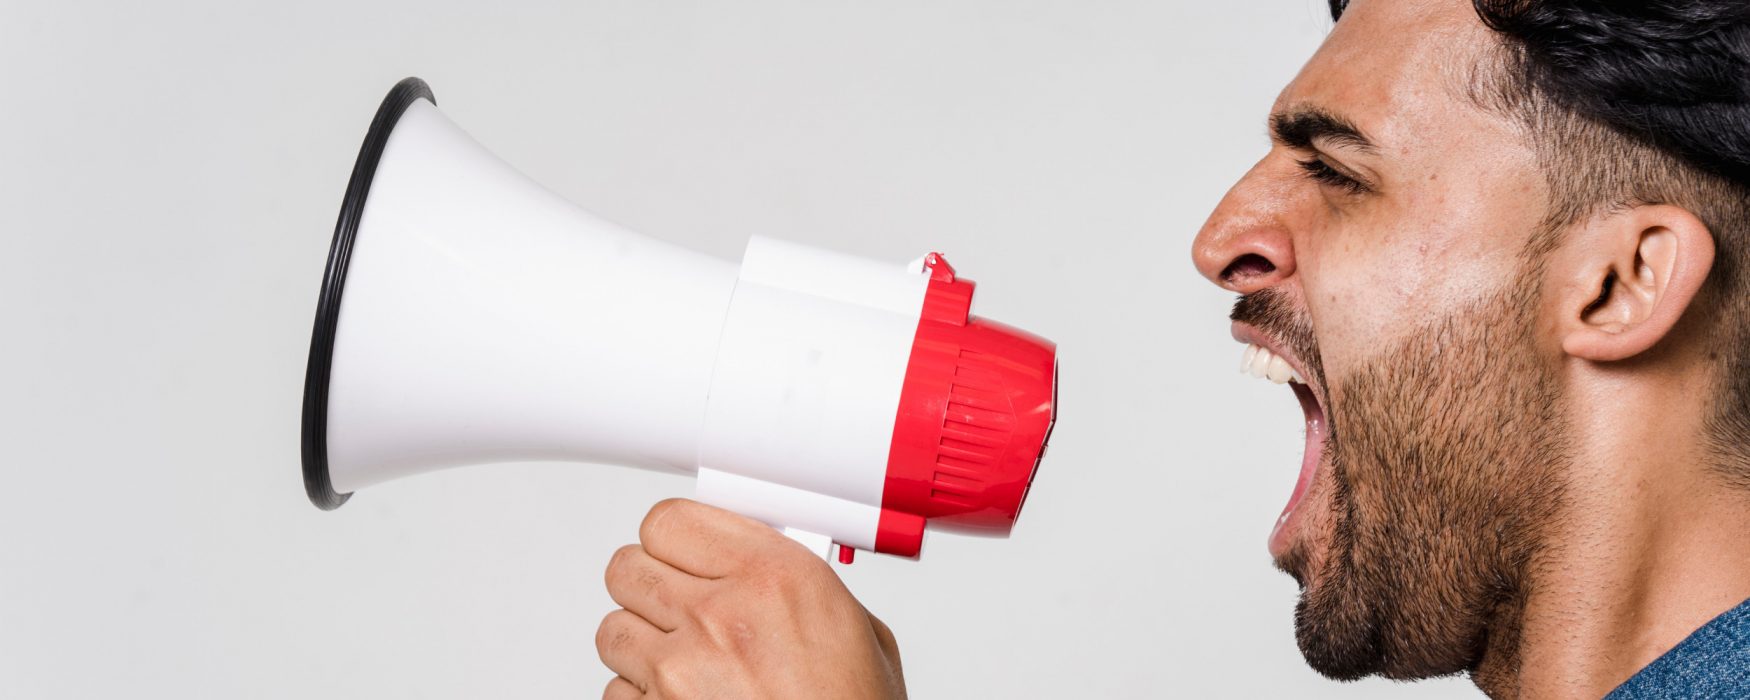 Image of a person shouting into a megaphone